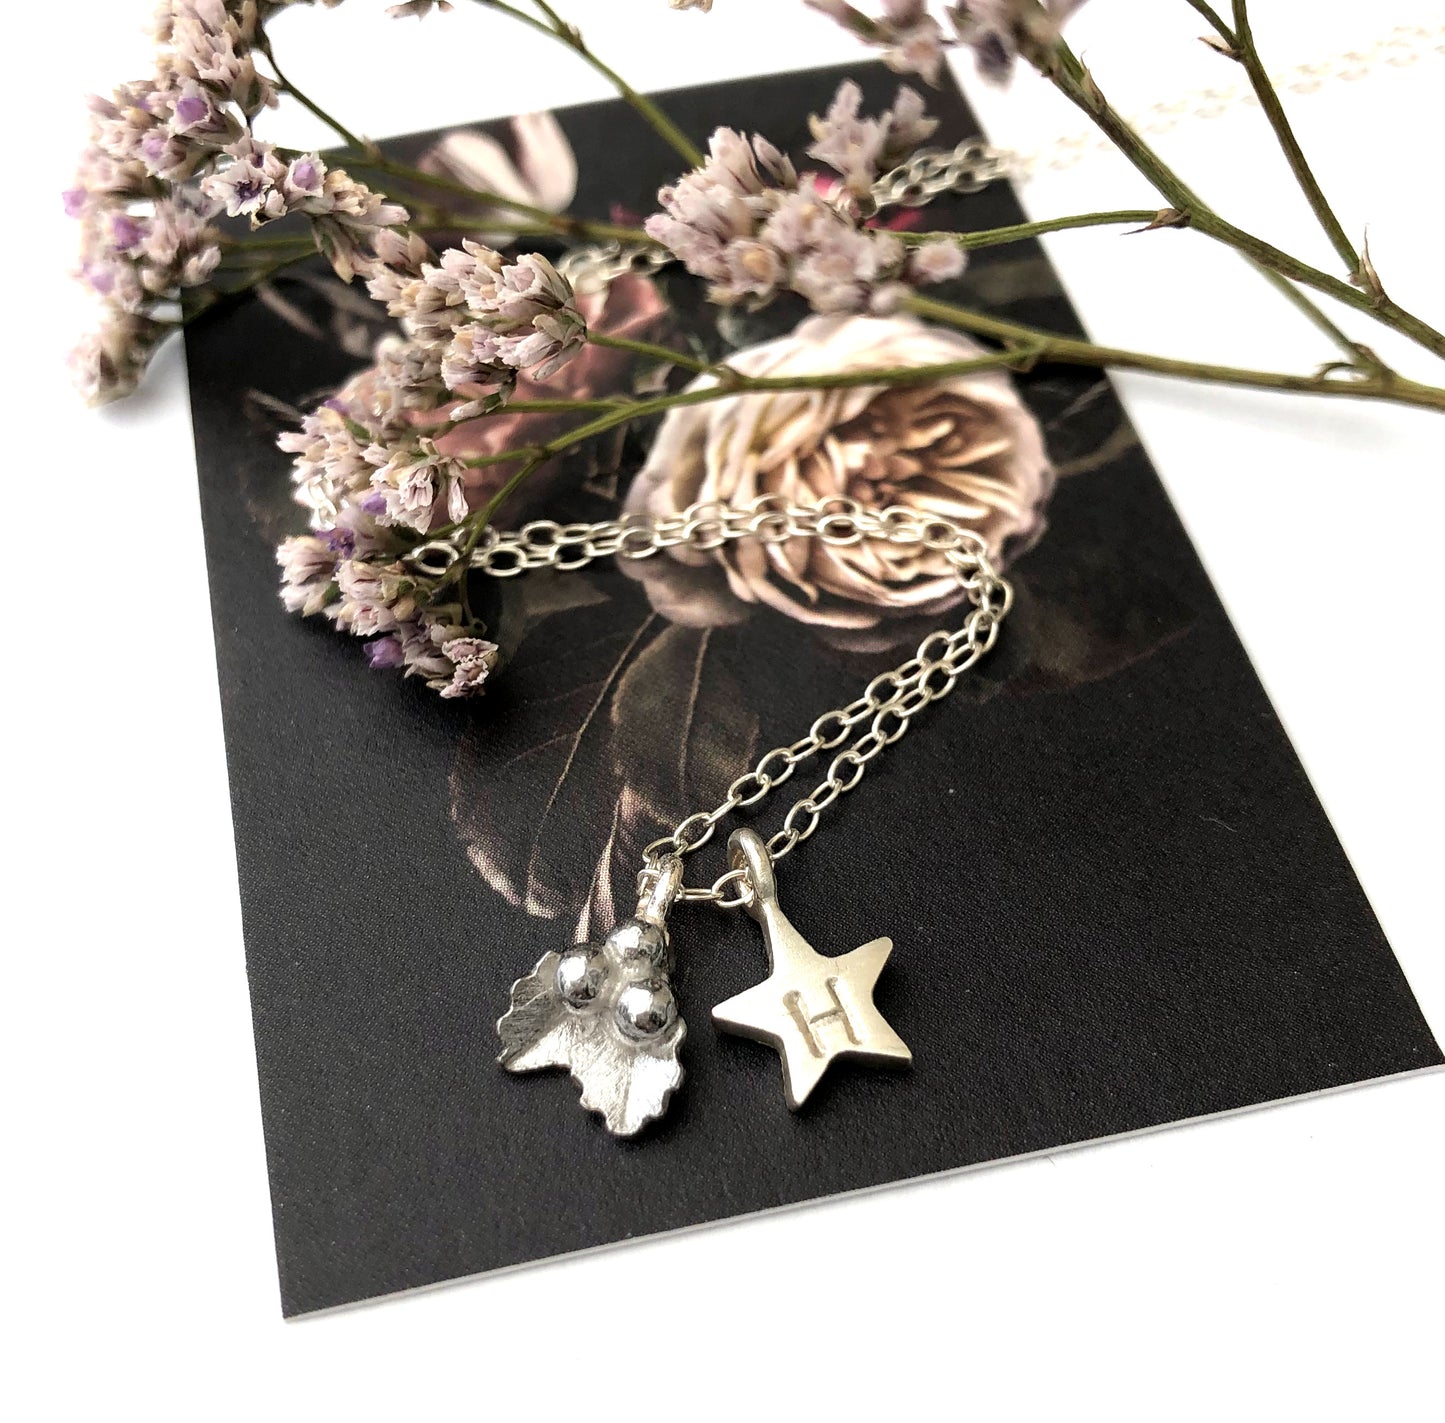 Holly Necklace With Initial Star Charm with flower gift card